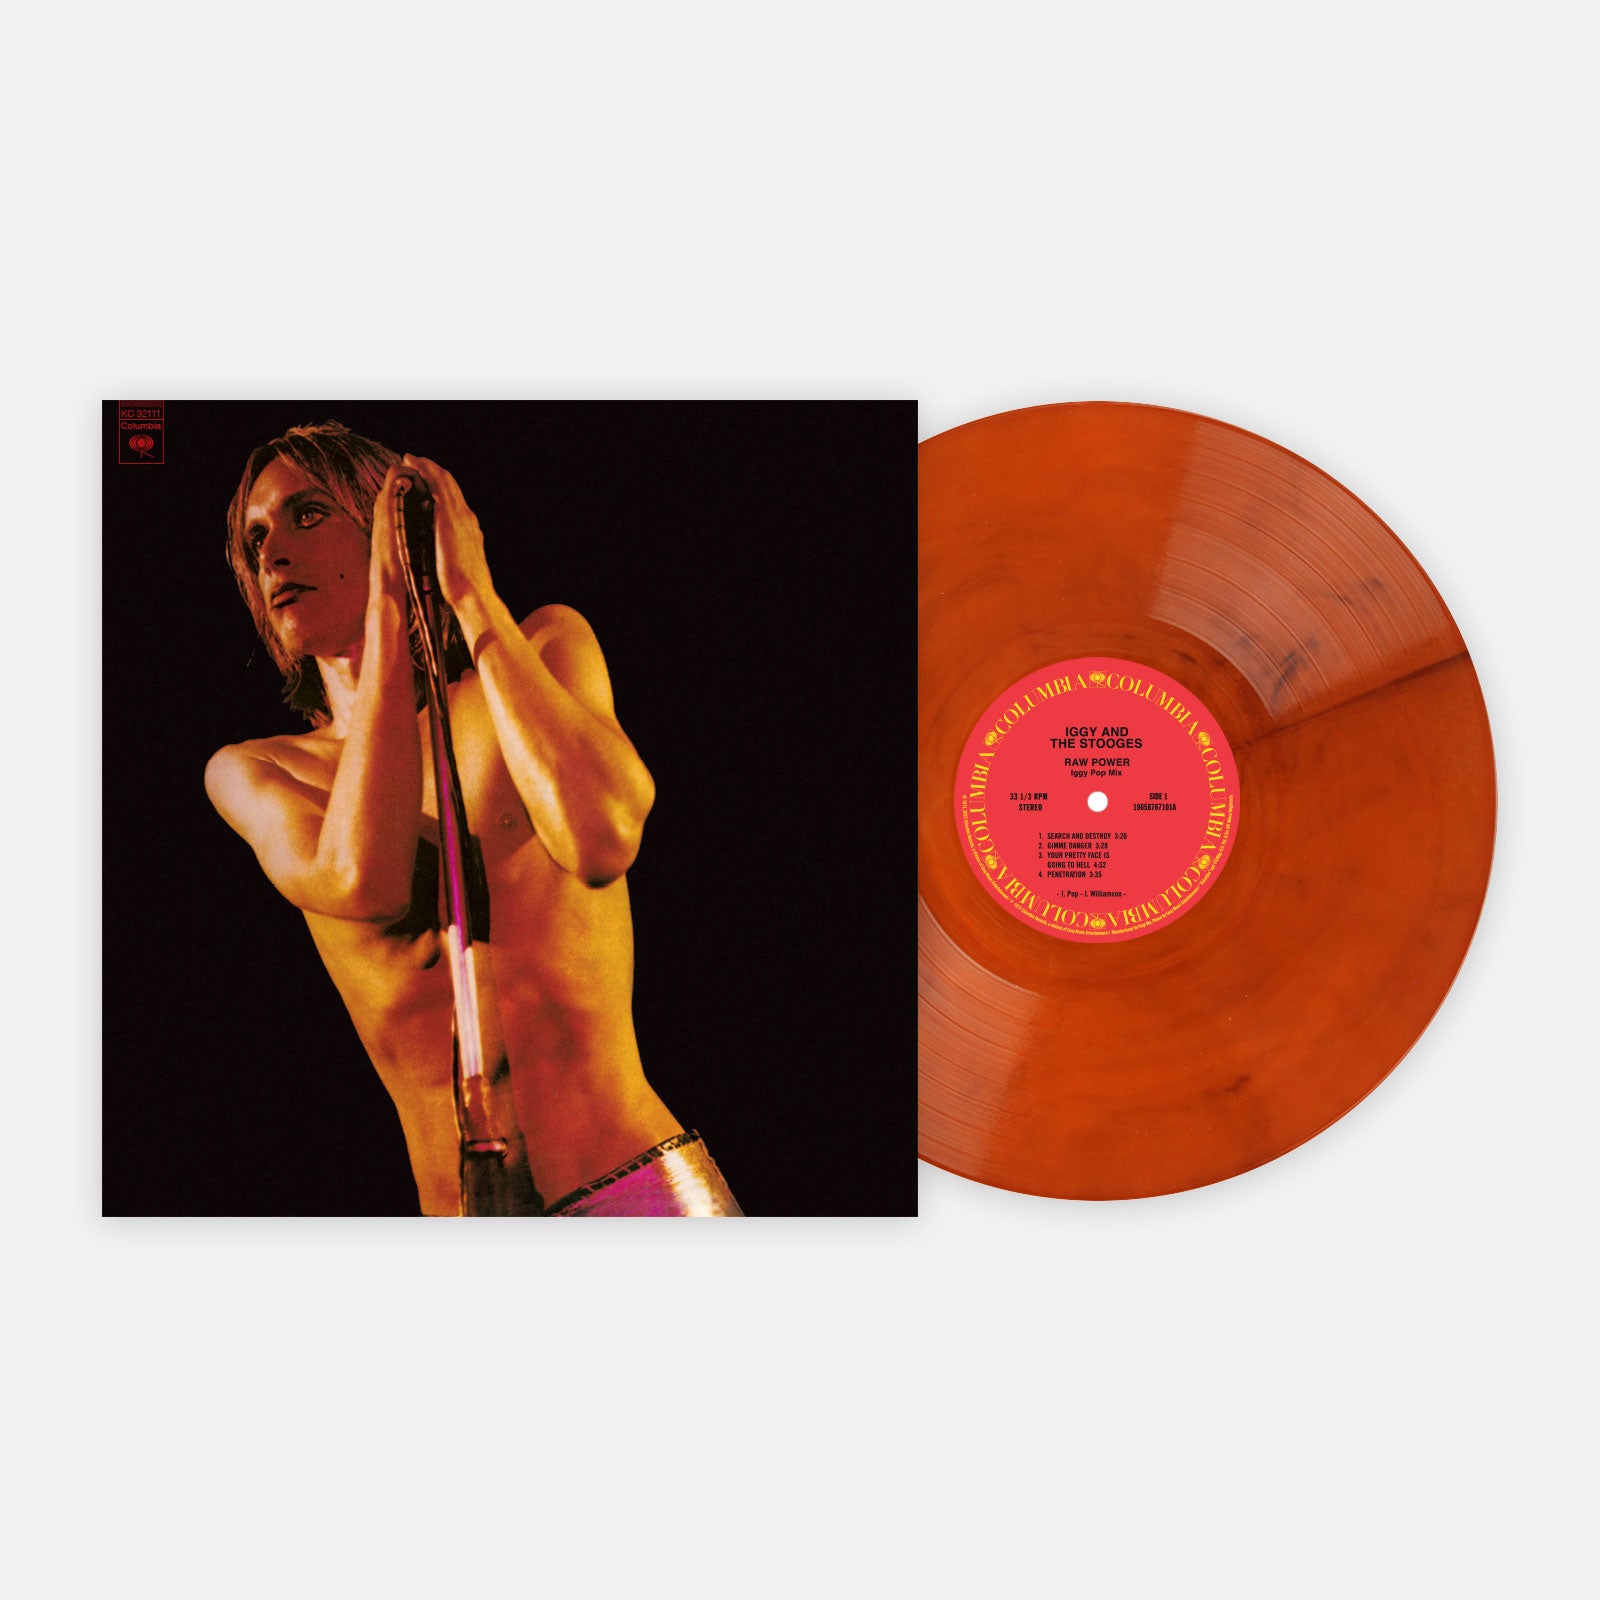 Iggy and The Stooges 'Raw Power' - Vinyl Me, Please